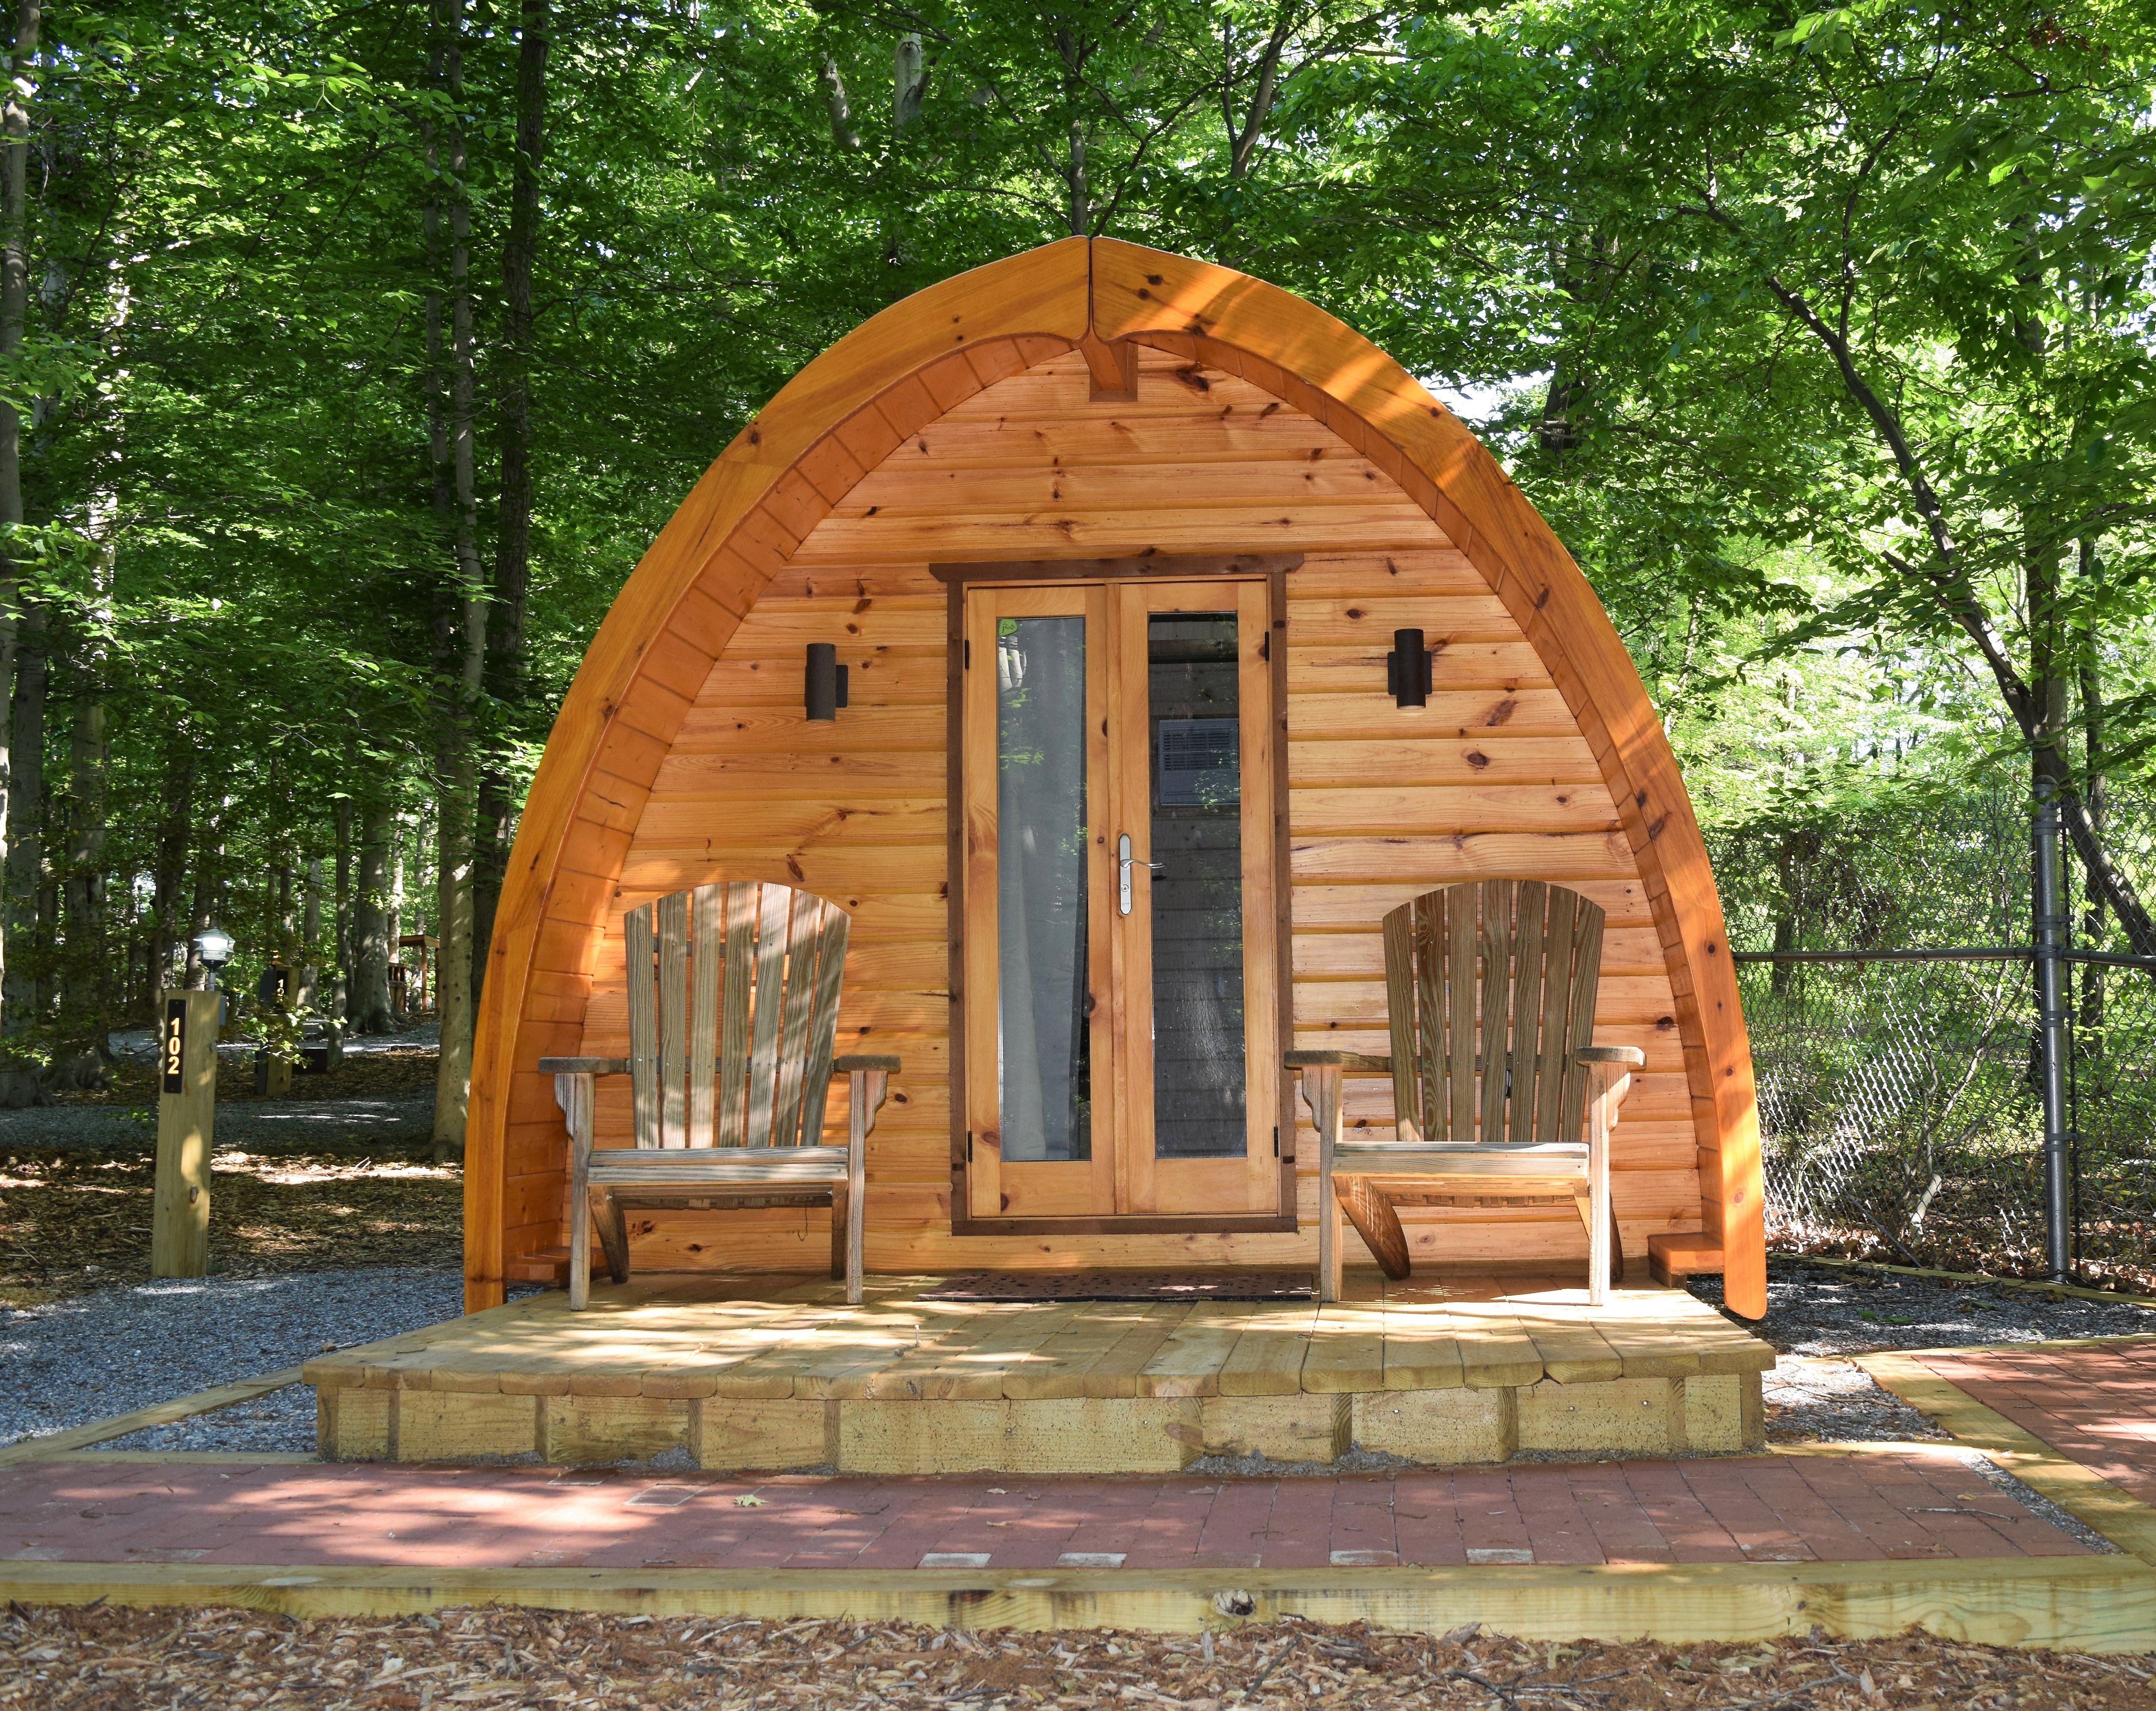 These quirky glamping pods sleep up to 4 people, with electricity and A/C.